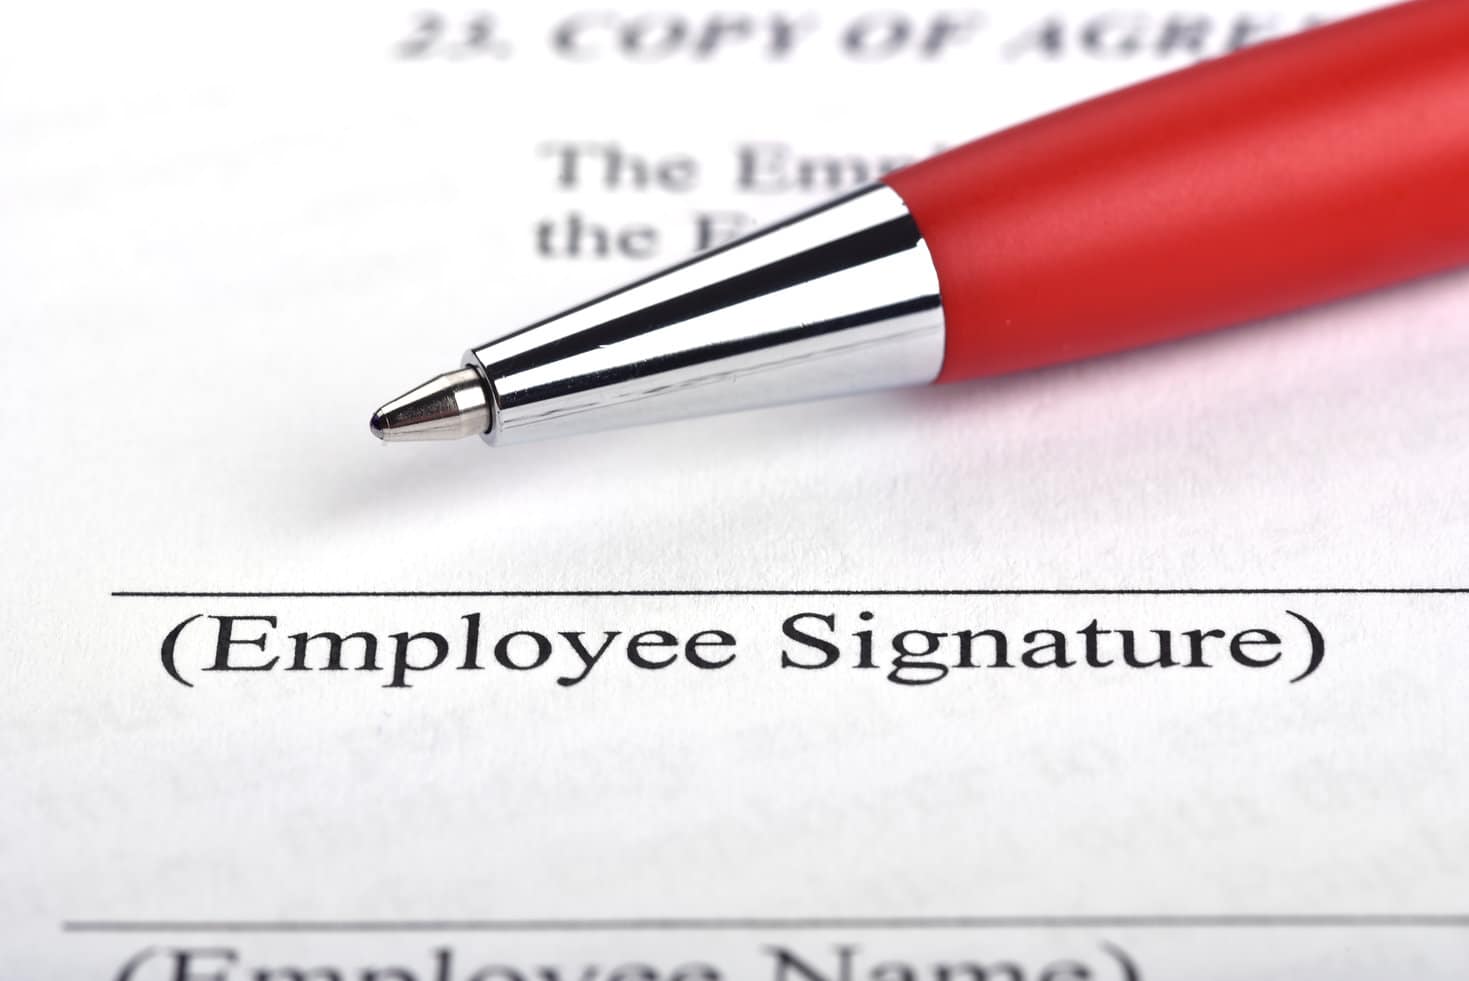 Avoid unfair contracts when getting a job